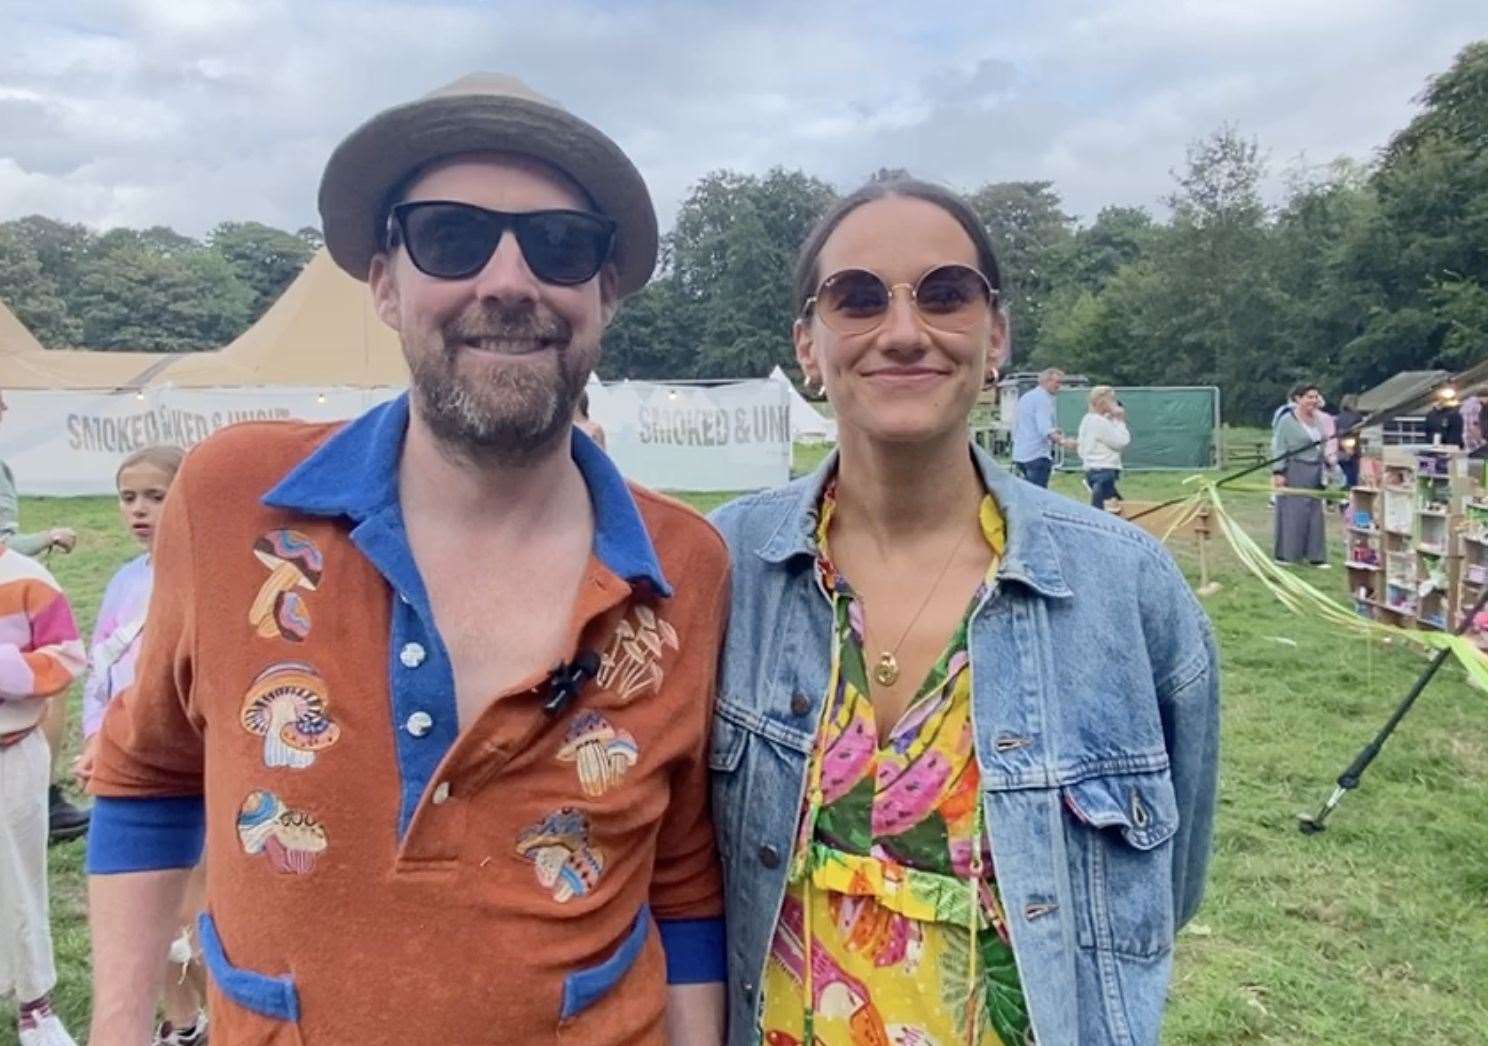 Kaiser Chiefs frontman, Ricky Wilson and his wife Grace Zito were among the attendees at the Smoked & Uncut Festival in Bridge, near Canterbury